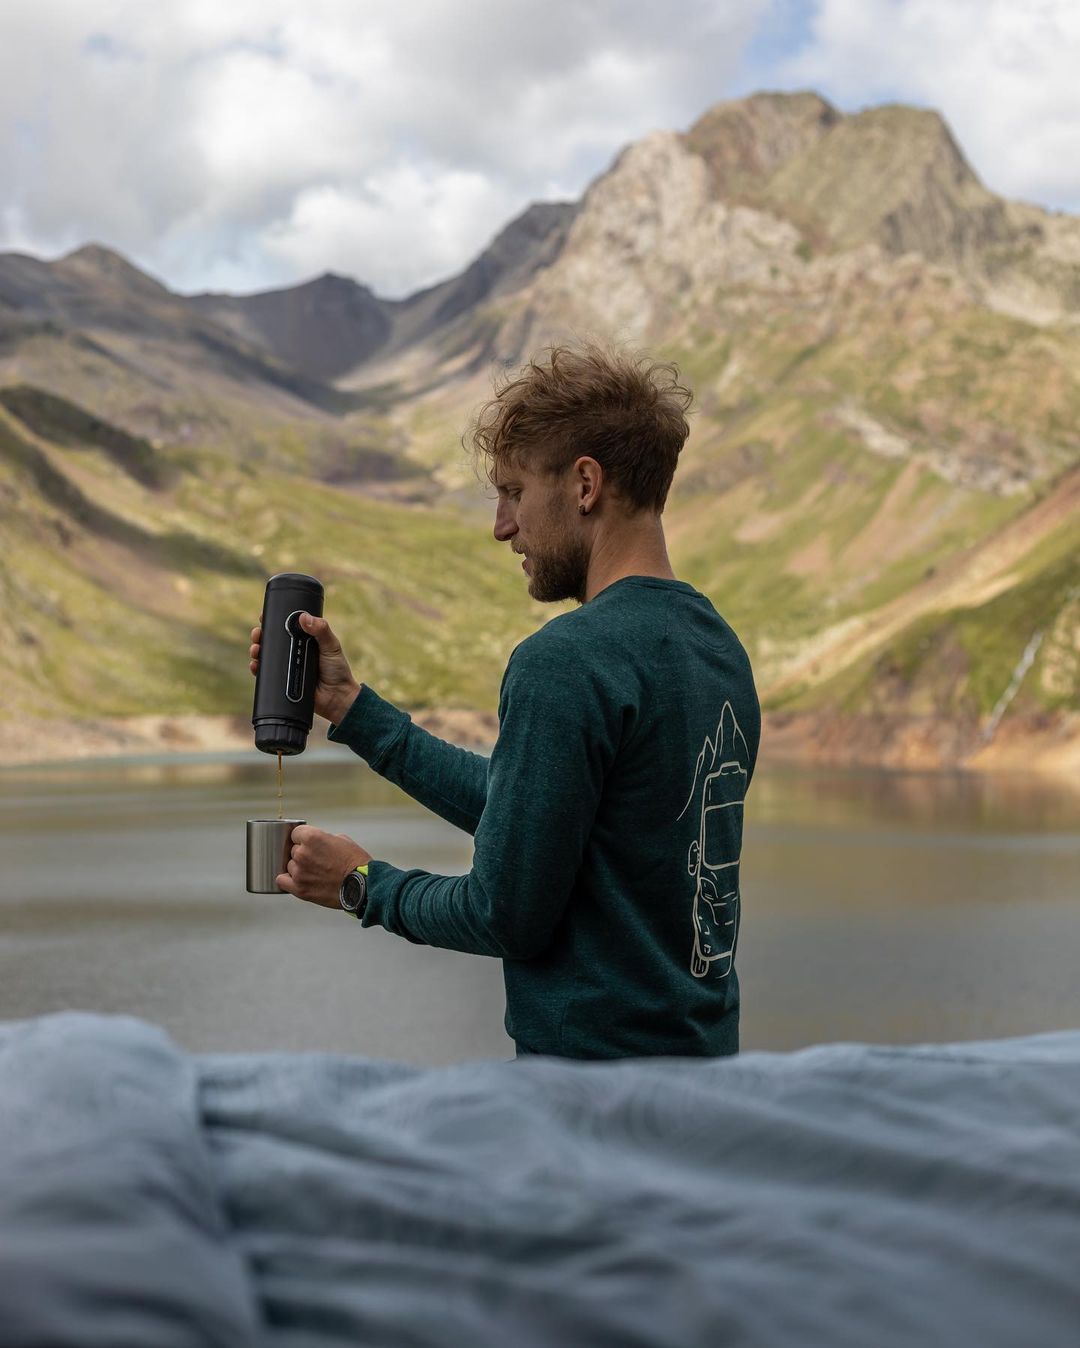 Conqueco portable and lightweight Espresso Maker is perfect for anyone on the go. It is designed to fit easily in a cup holder or a bottle holder in a backpack, so you can take it with you on your next outdoor adventure! 